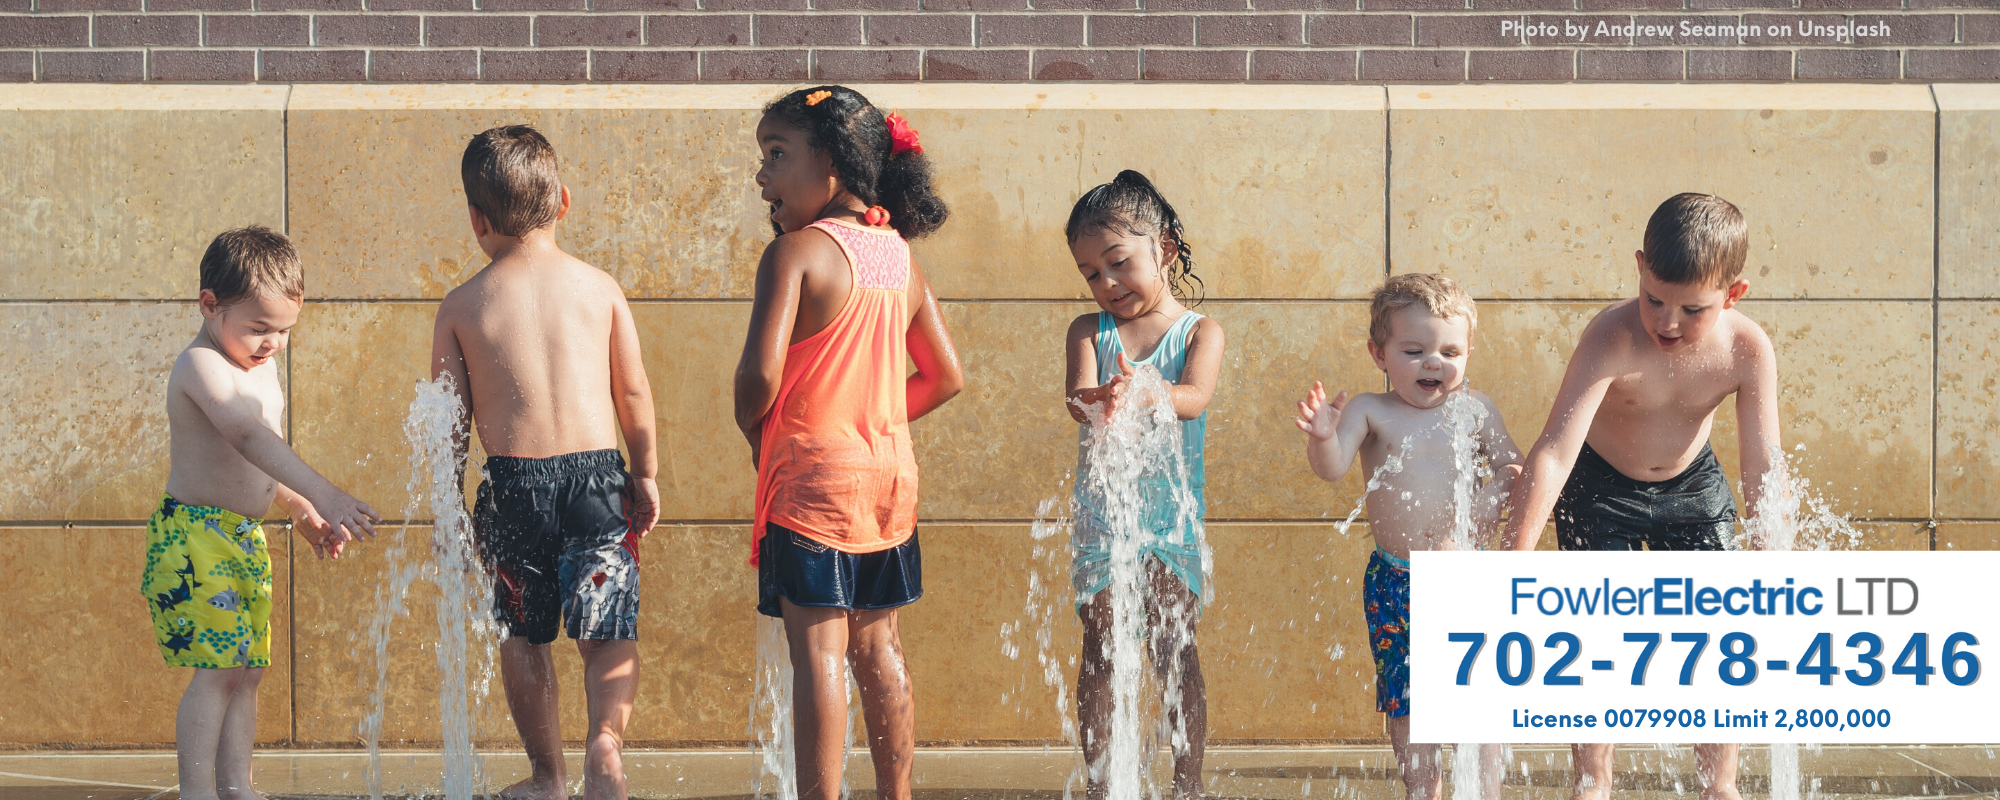 kids playing at splash pad feature image for electrical safety tips for summer